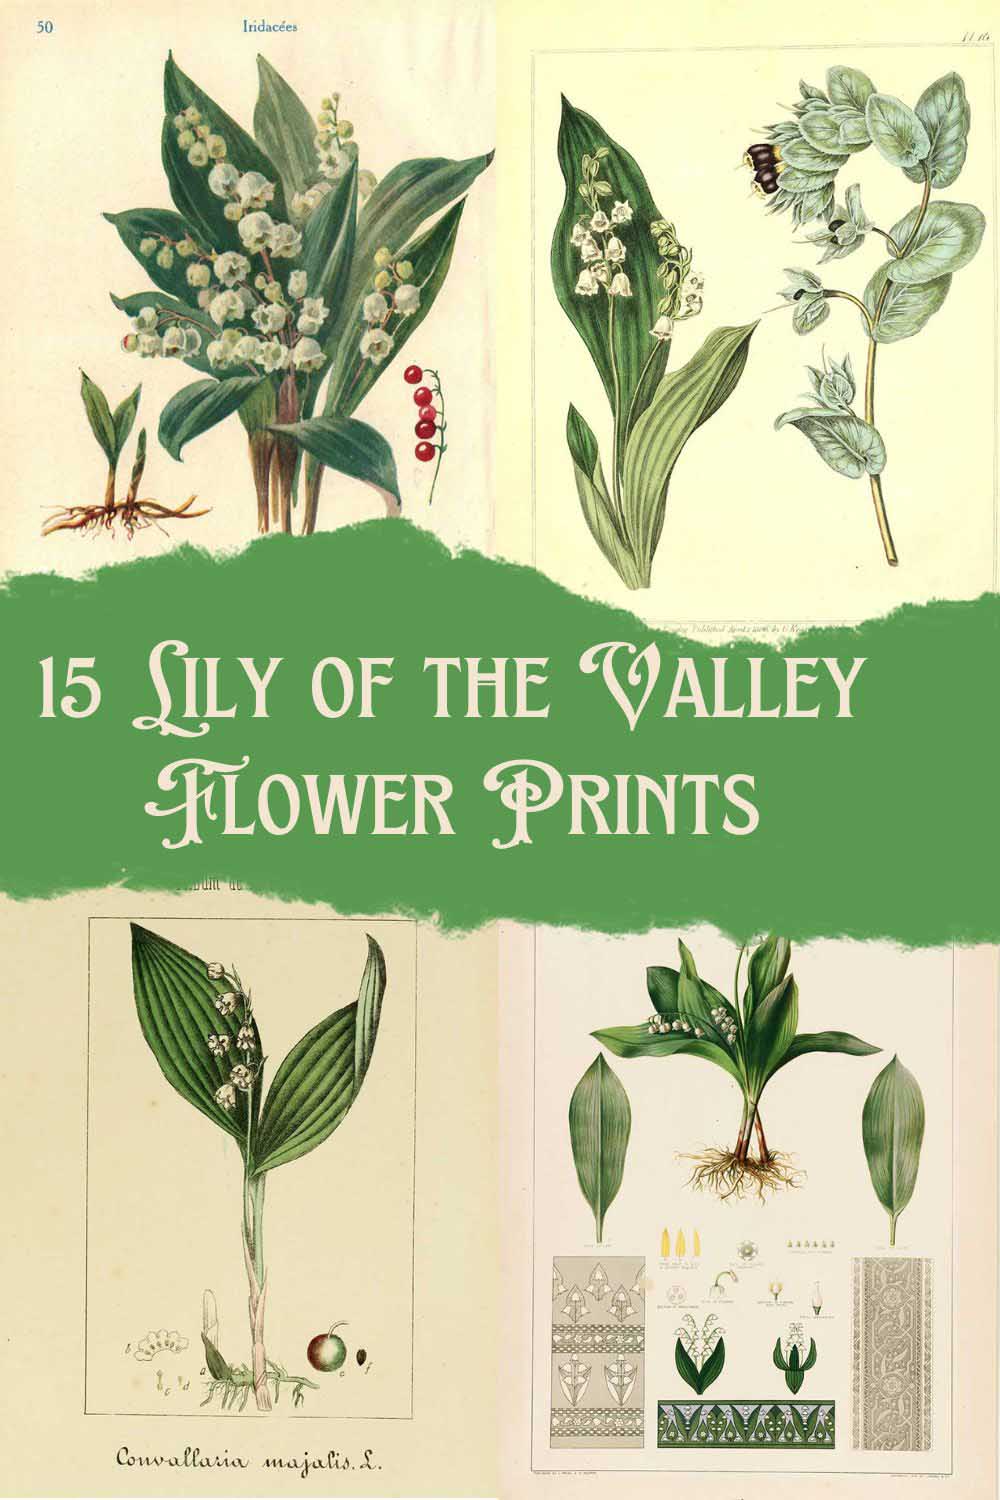 Lily of the Valley botanical illustrations